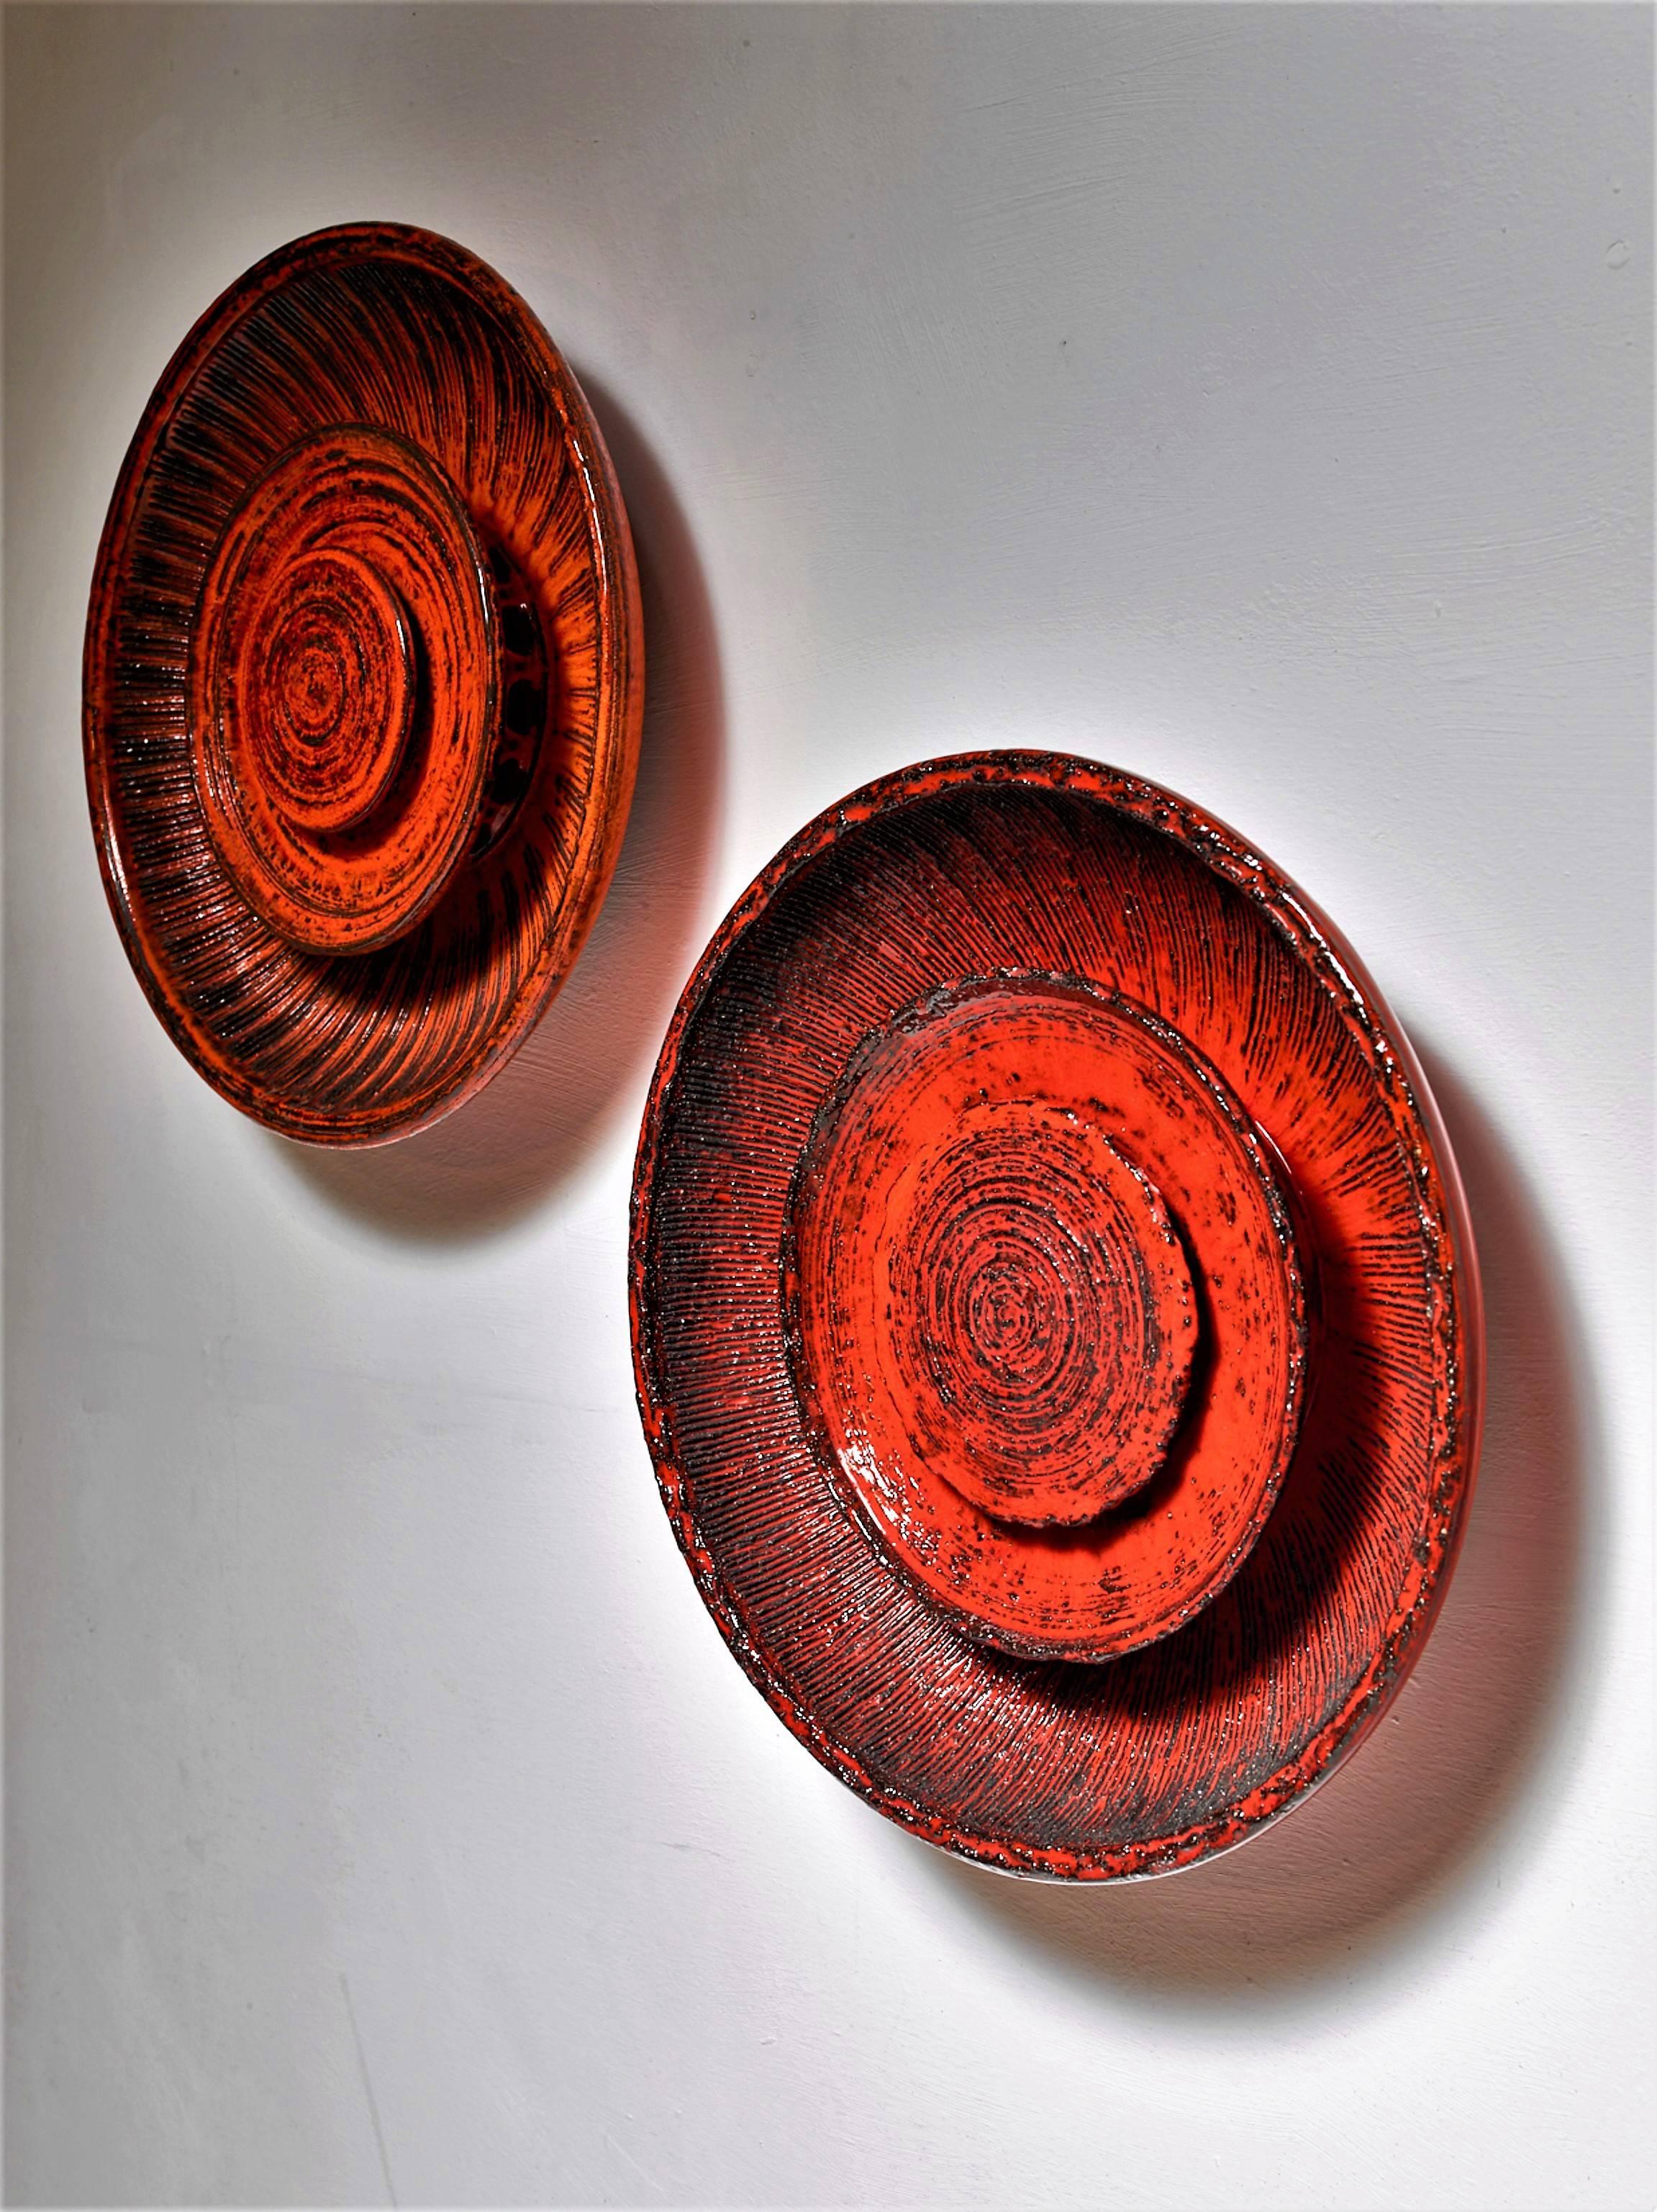 A pair of red ceramic wall lamps by Carl Johan Ege Nielsen for Dagnæs, Denmark. The lamp is made of a large bowl with two smaller discs inside. The light shines through round holes behind the discs, giving it a stunning light effect.
Marked by Ege